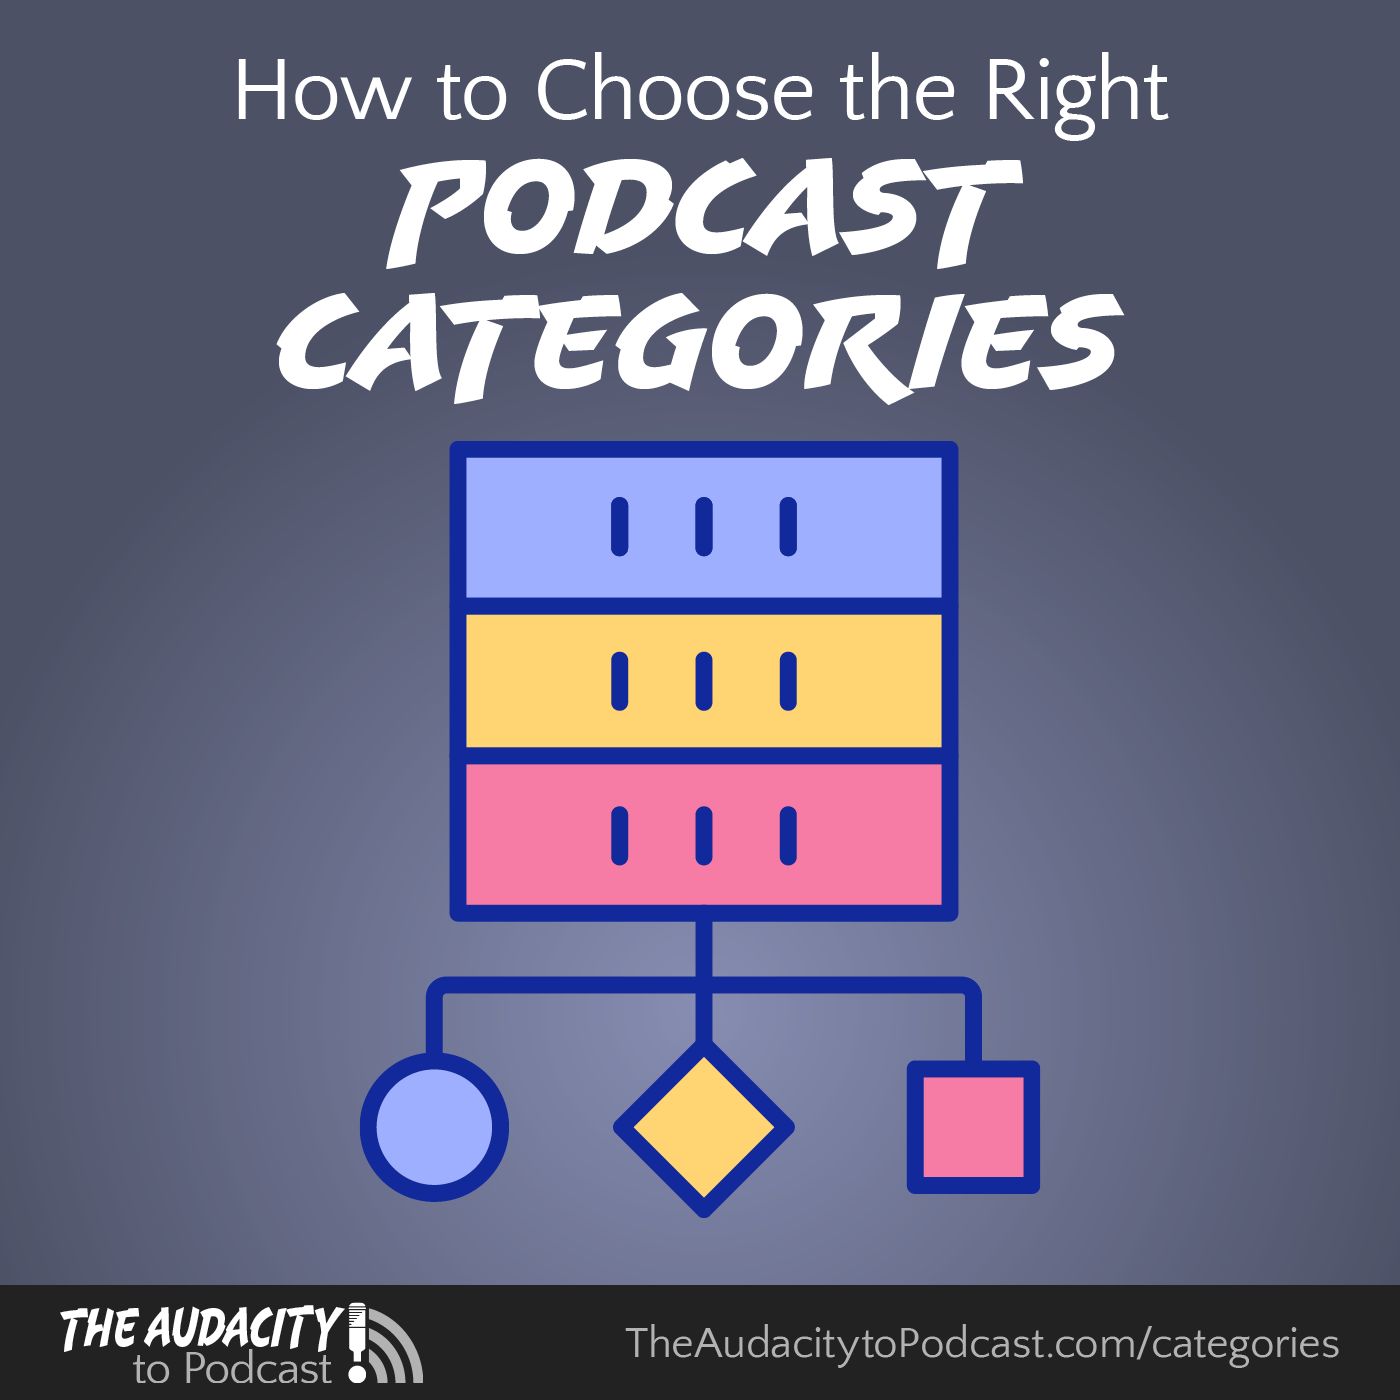 How to Choose the Right Podcast Categories